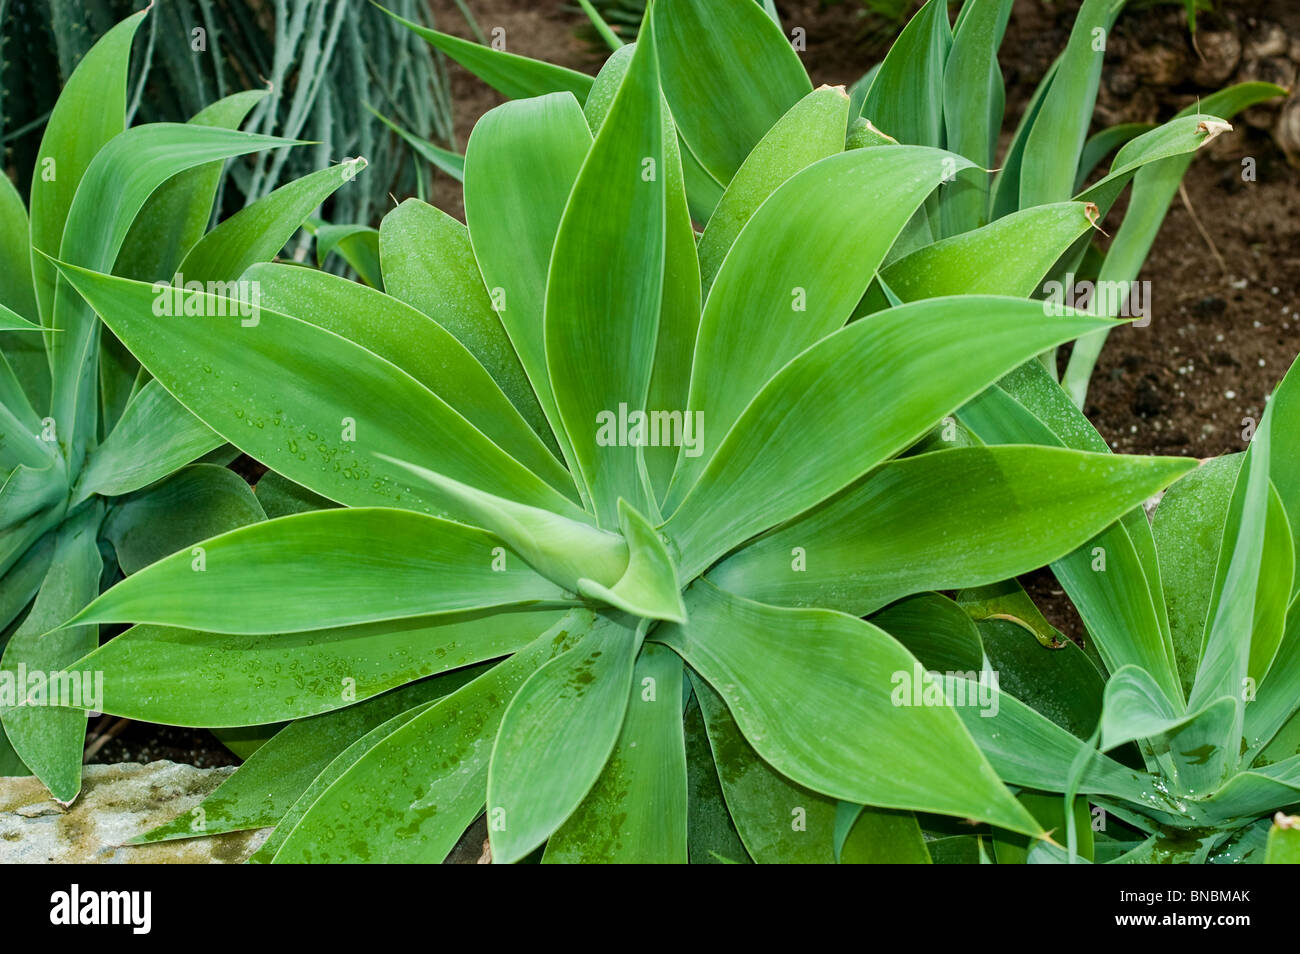 Foxtail agave, Agave attenuata, Agavaceae, Mexico Stock Photo